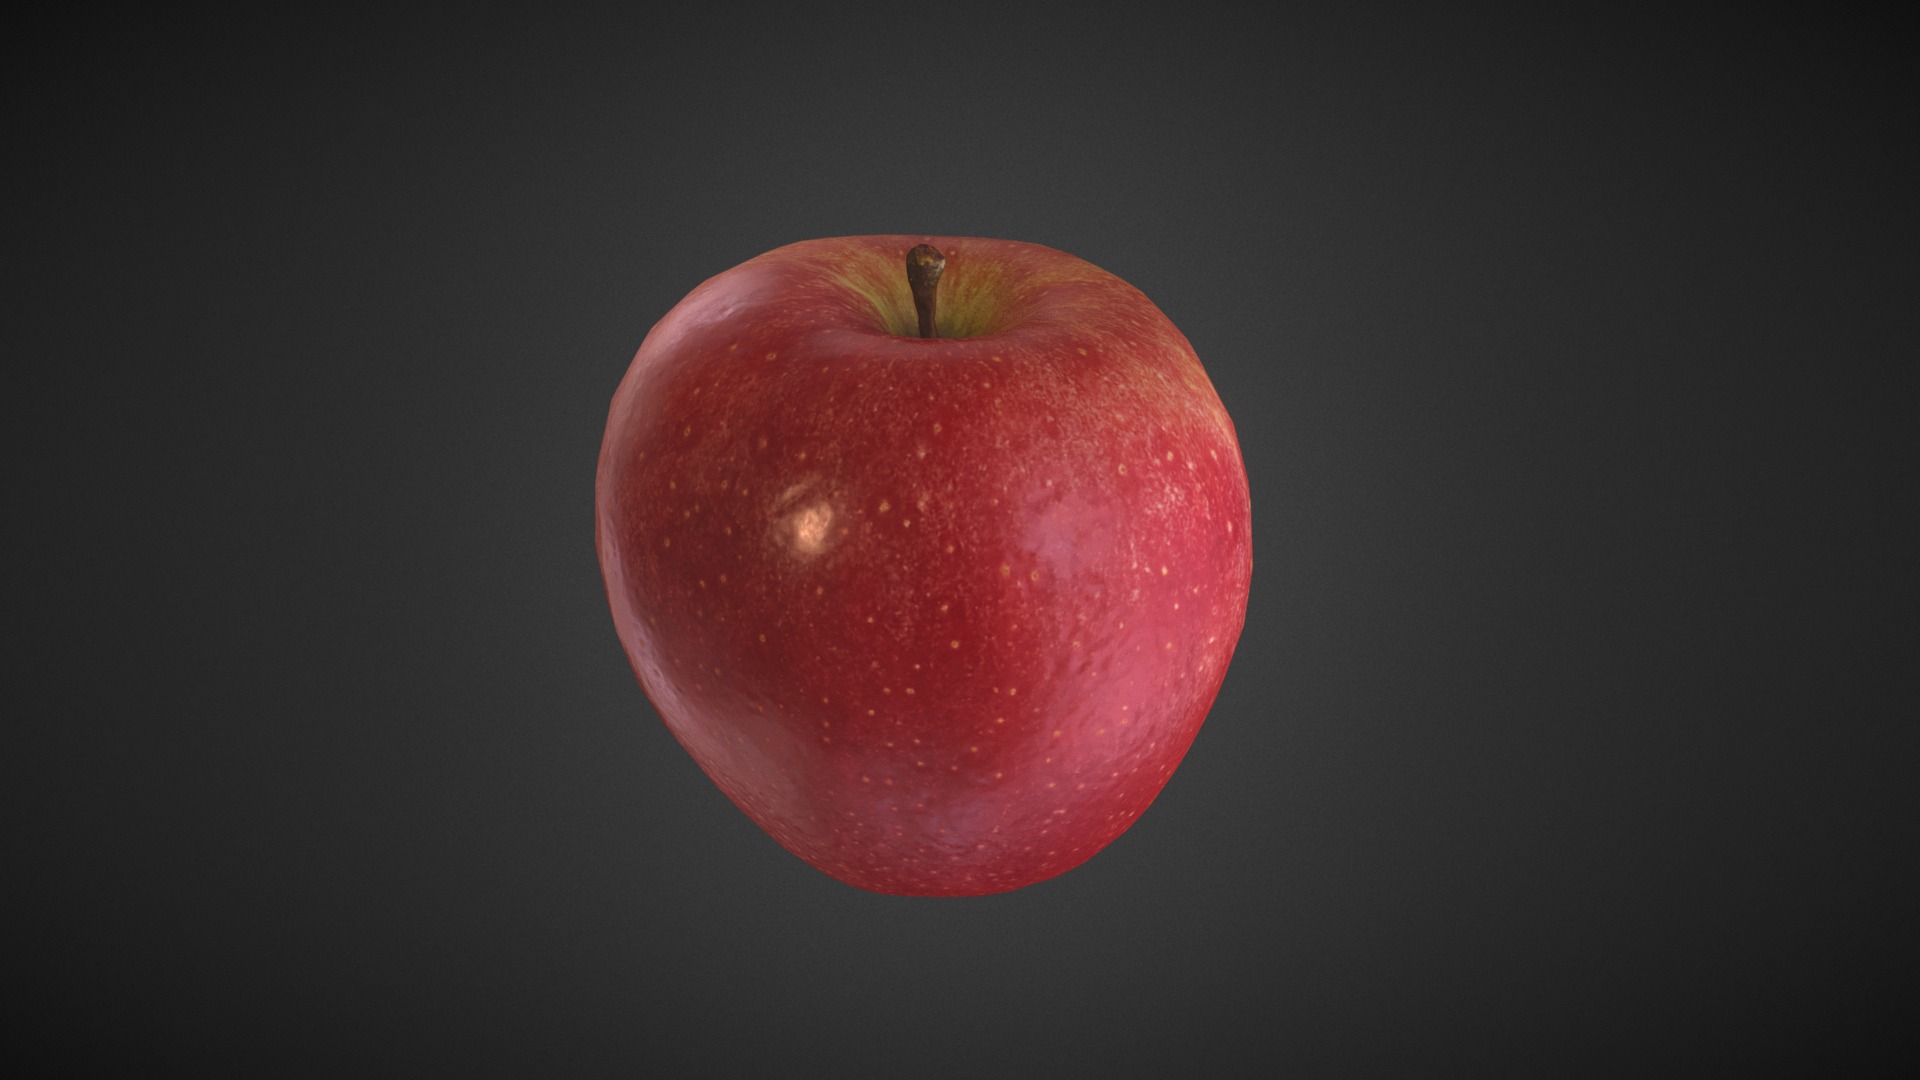 3D model Apple - This is a 3D model of the Apple. The 3D model is about a red apple on a black background.